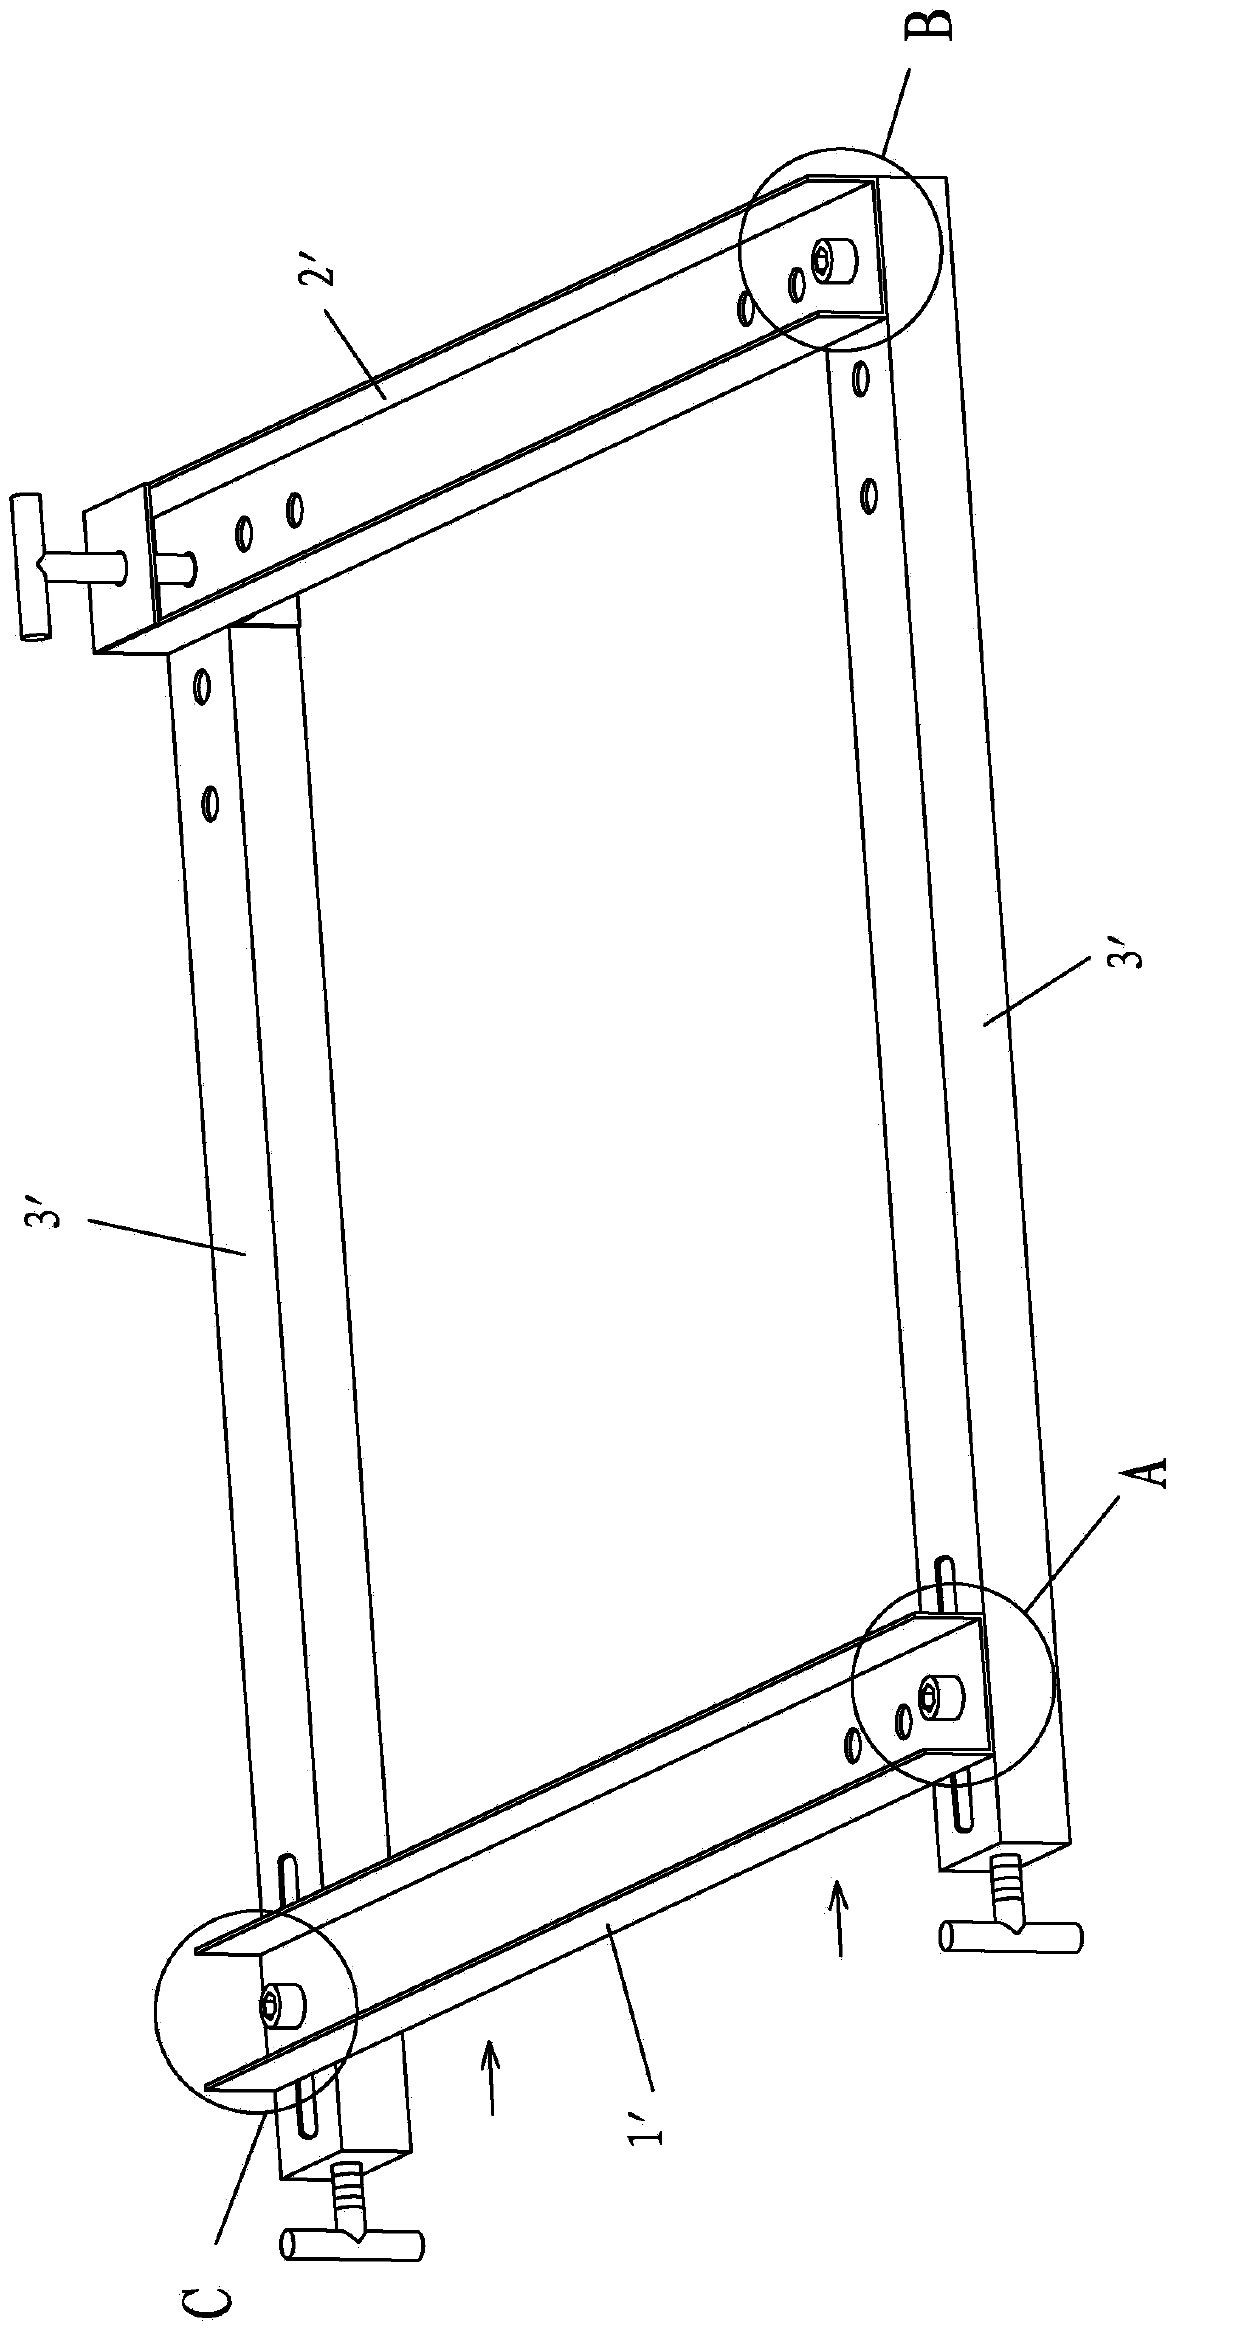 Quick insertion clamping frame of concrete blinding and method for clamping concrete blinding